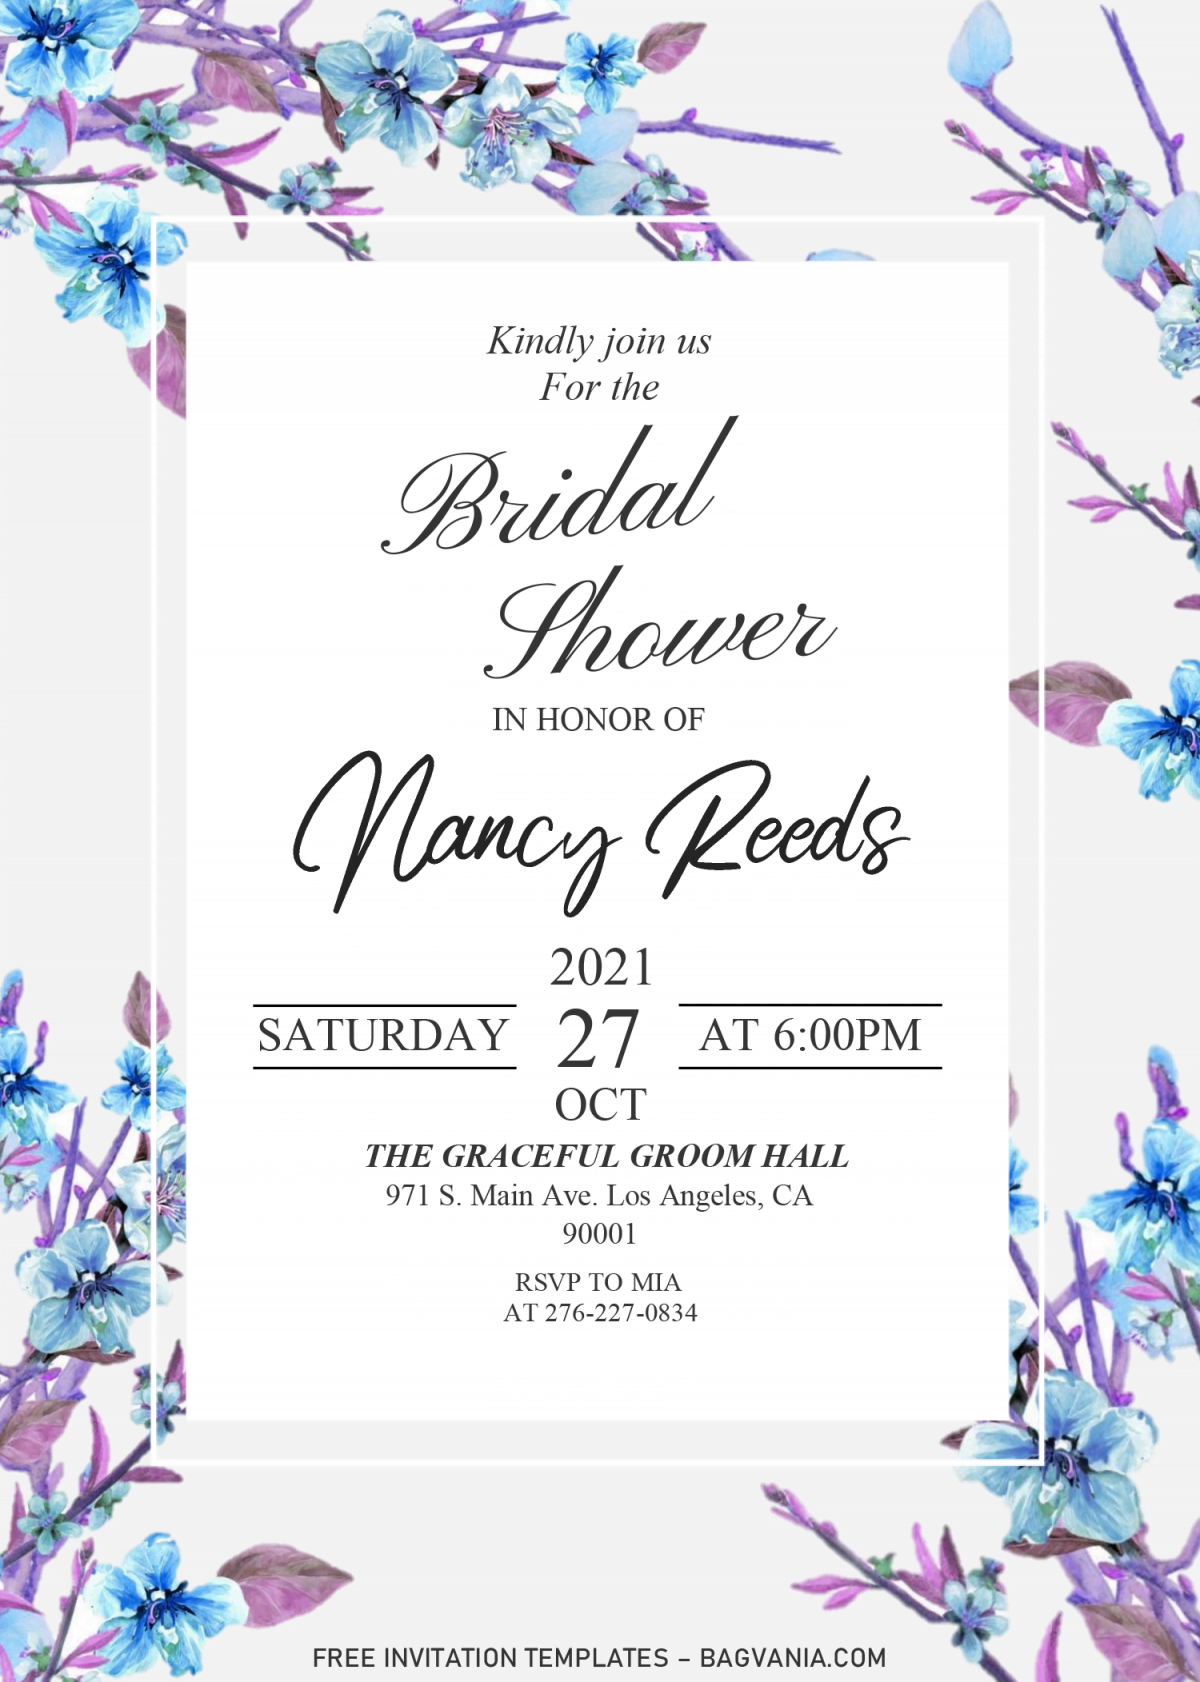 Modern Floral Invitation Templates - Editable .DOCX and has aesthetic fonts